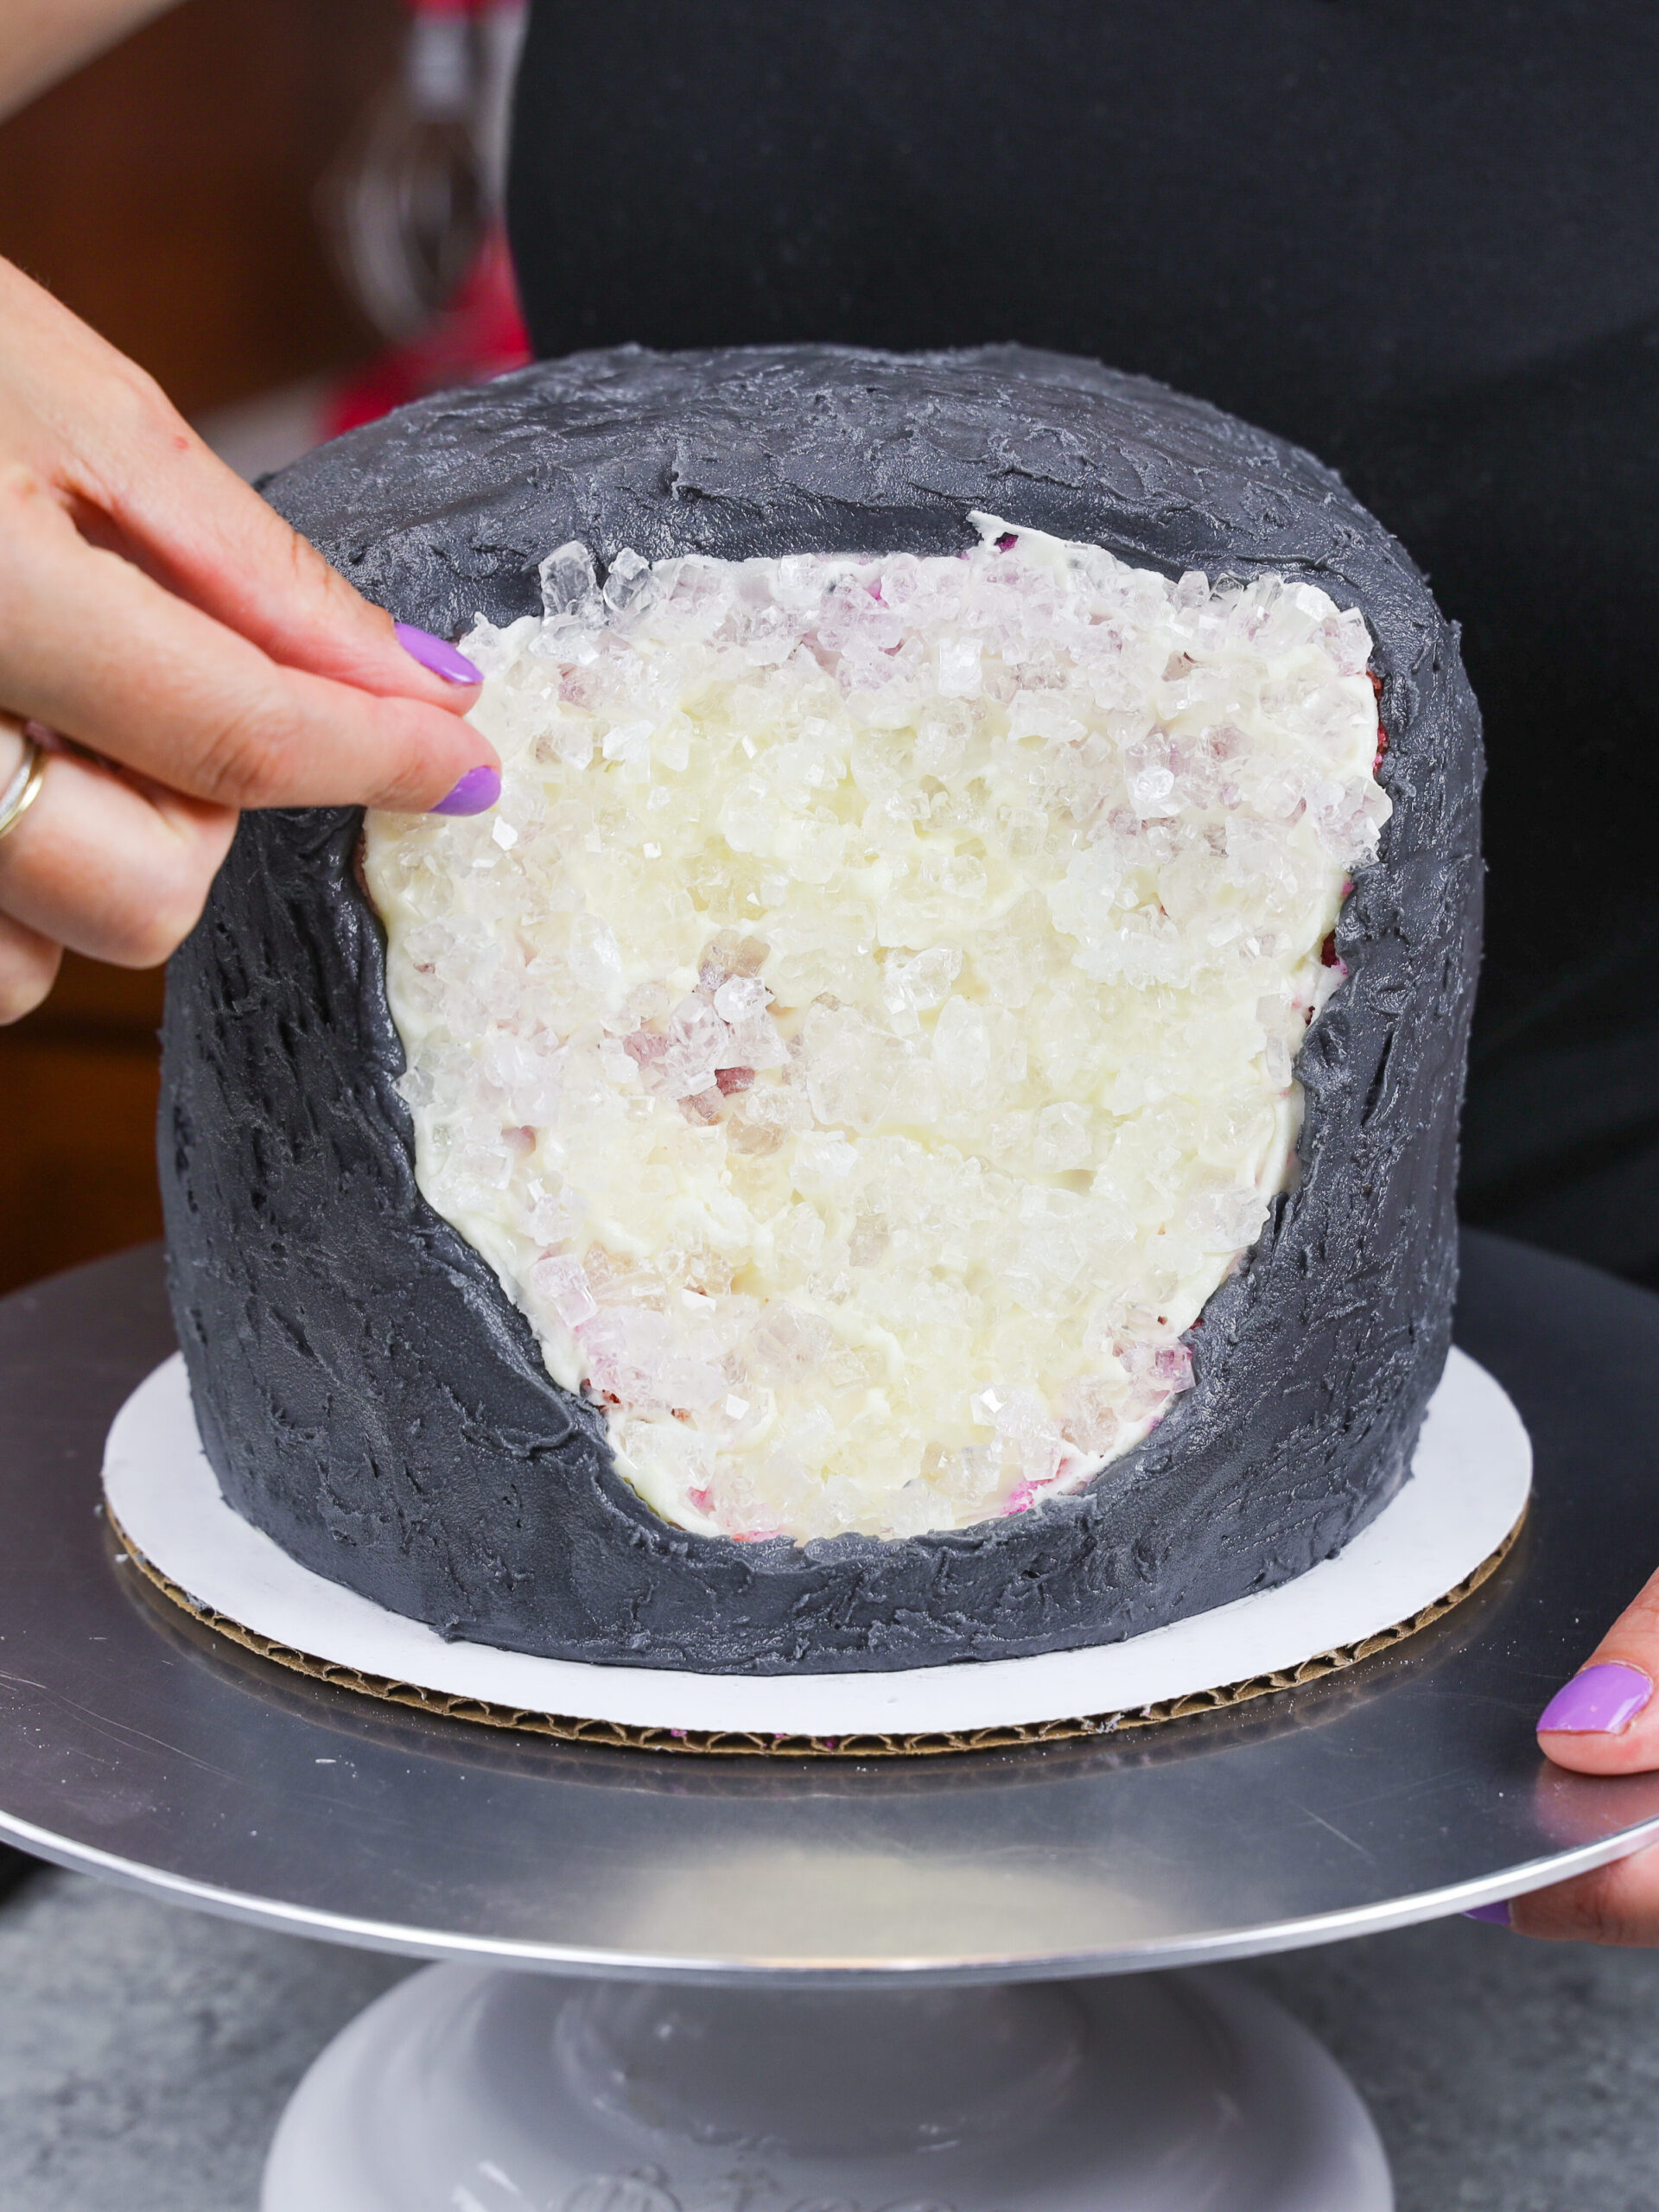 image of rock candy being pressed into a cake to make a geode cake